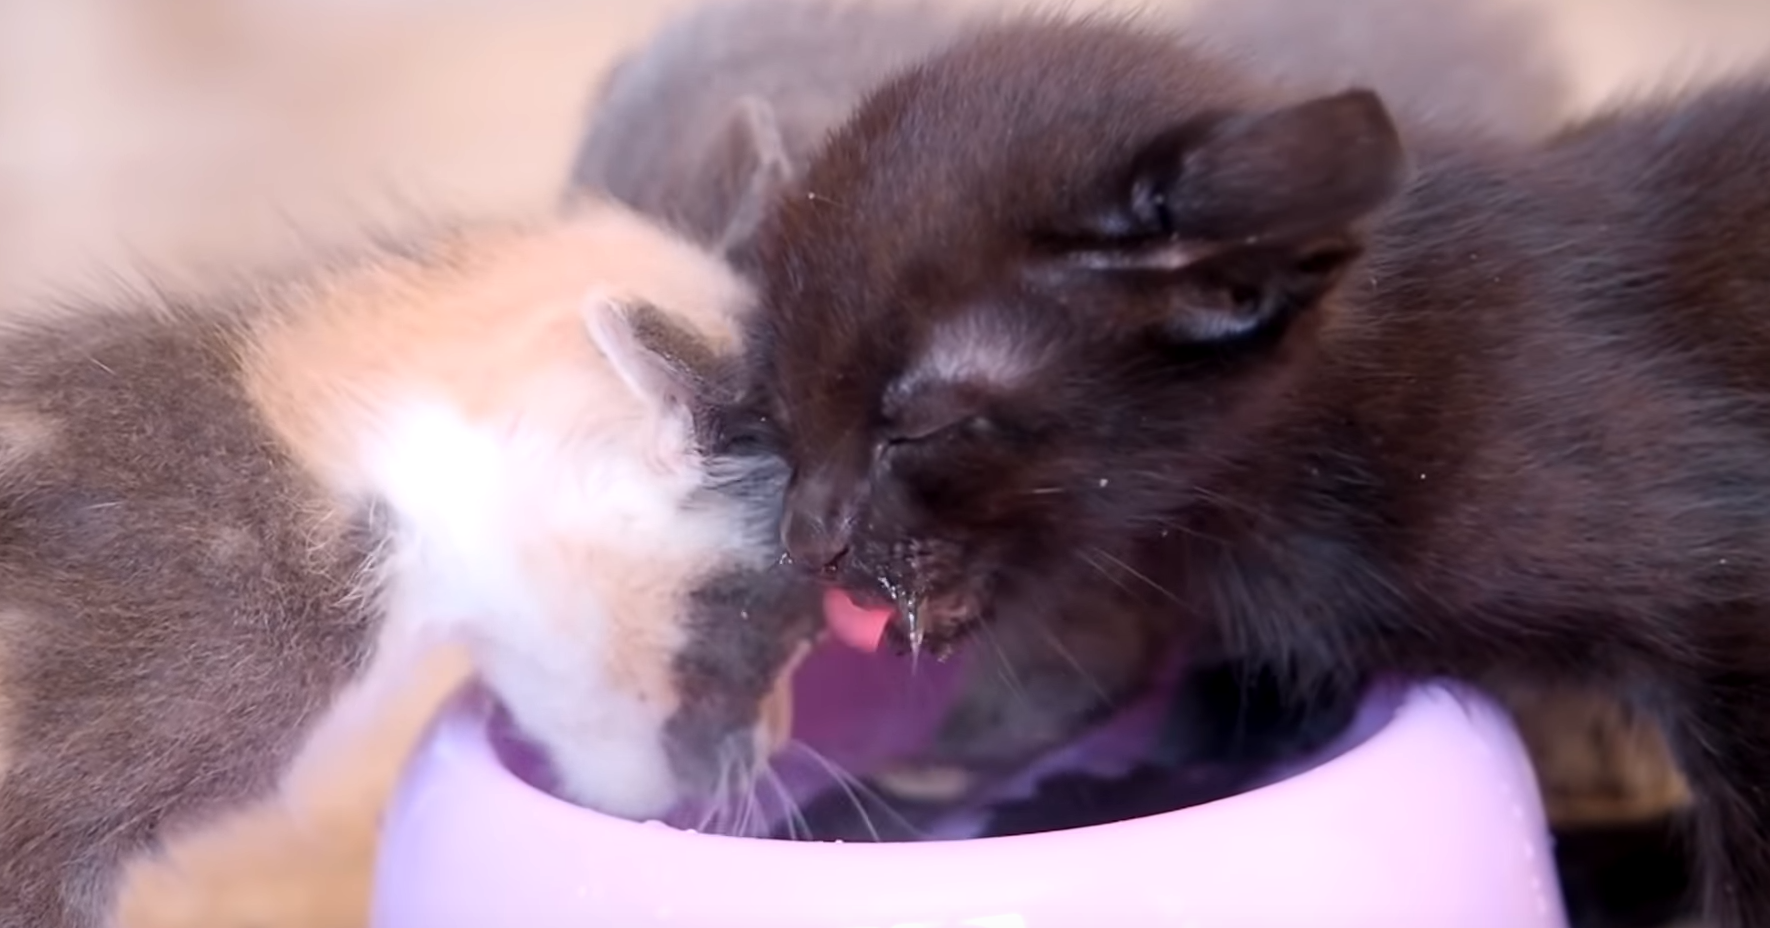 Kittens Learning To Drink Water